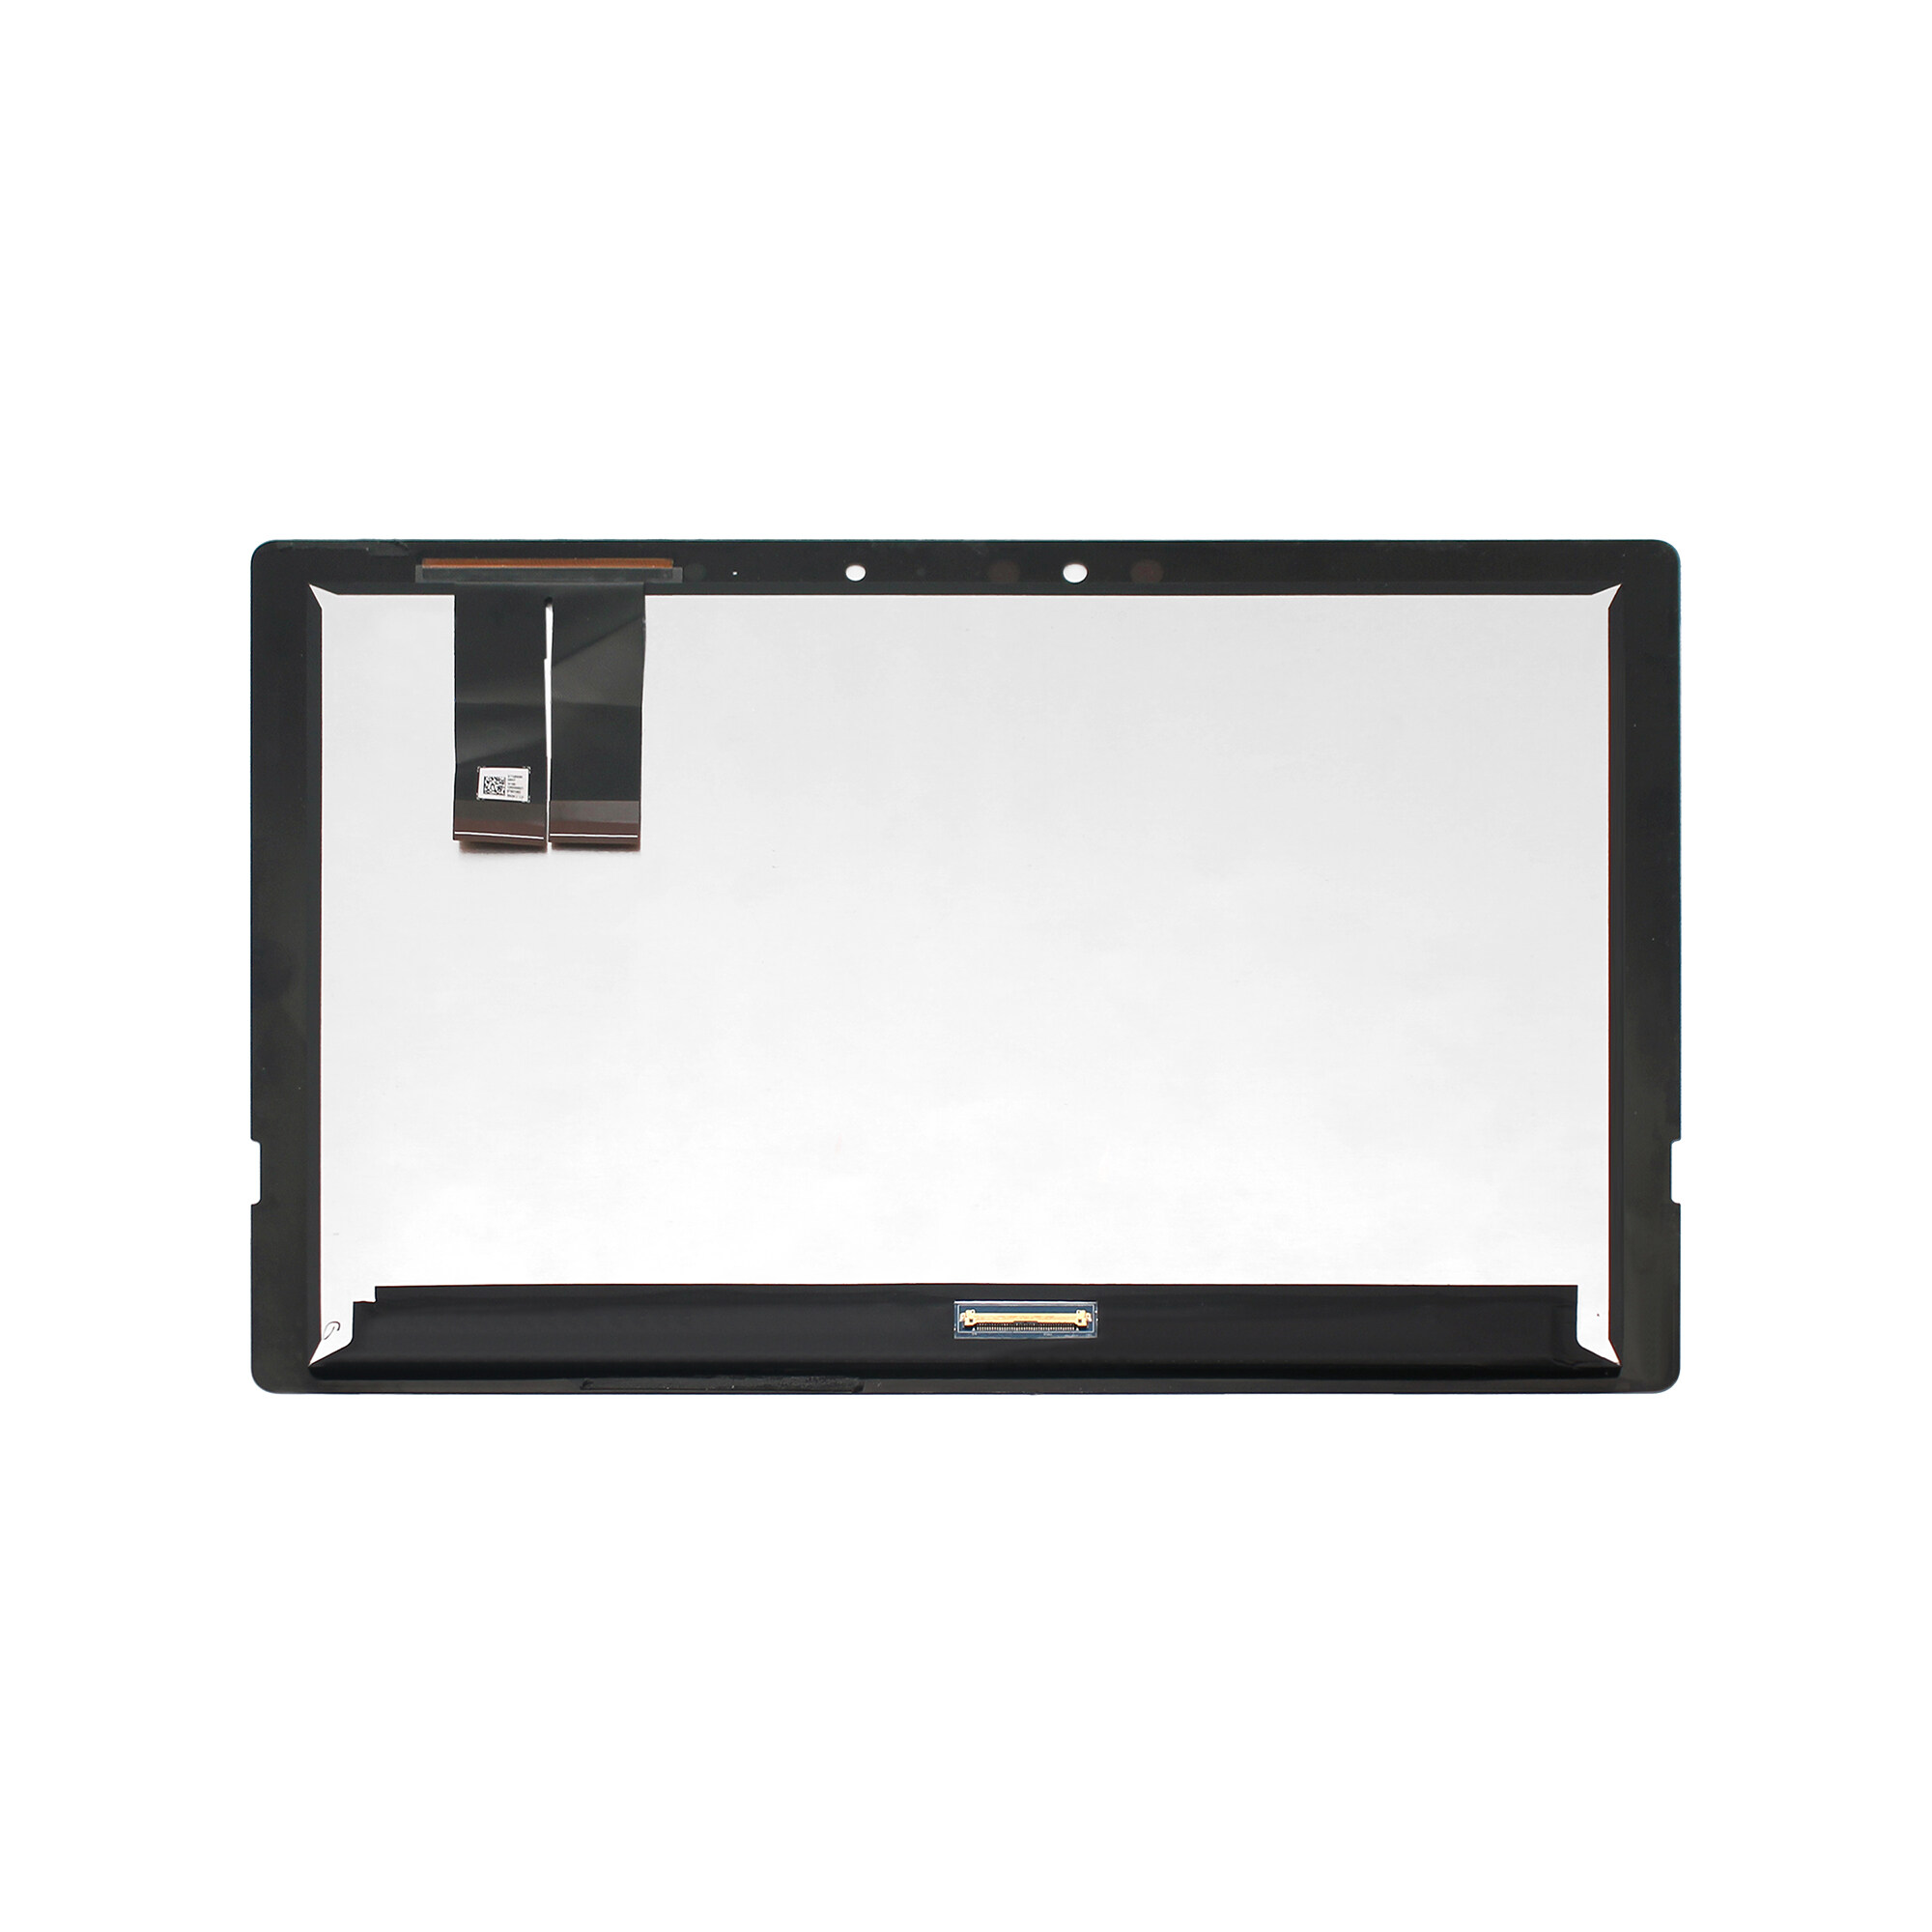 Kreplacement NV126A1M-N51 LCD Touch Screen Glass Digitizer Assembly For ASUS Transformer 3 Pro T303U WQHD